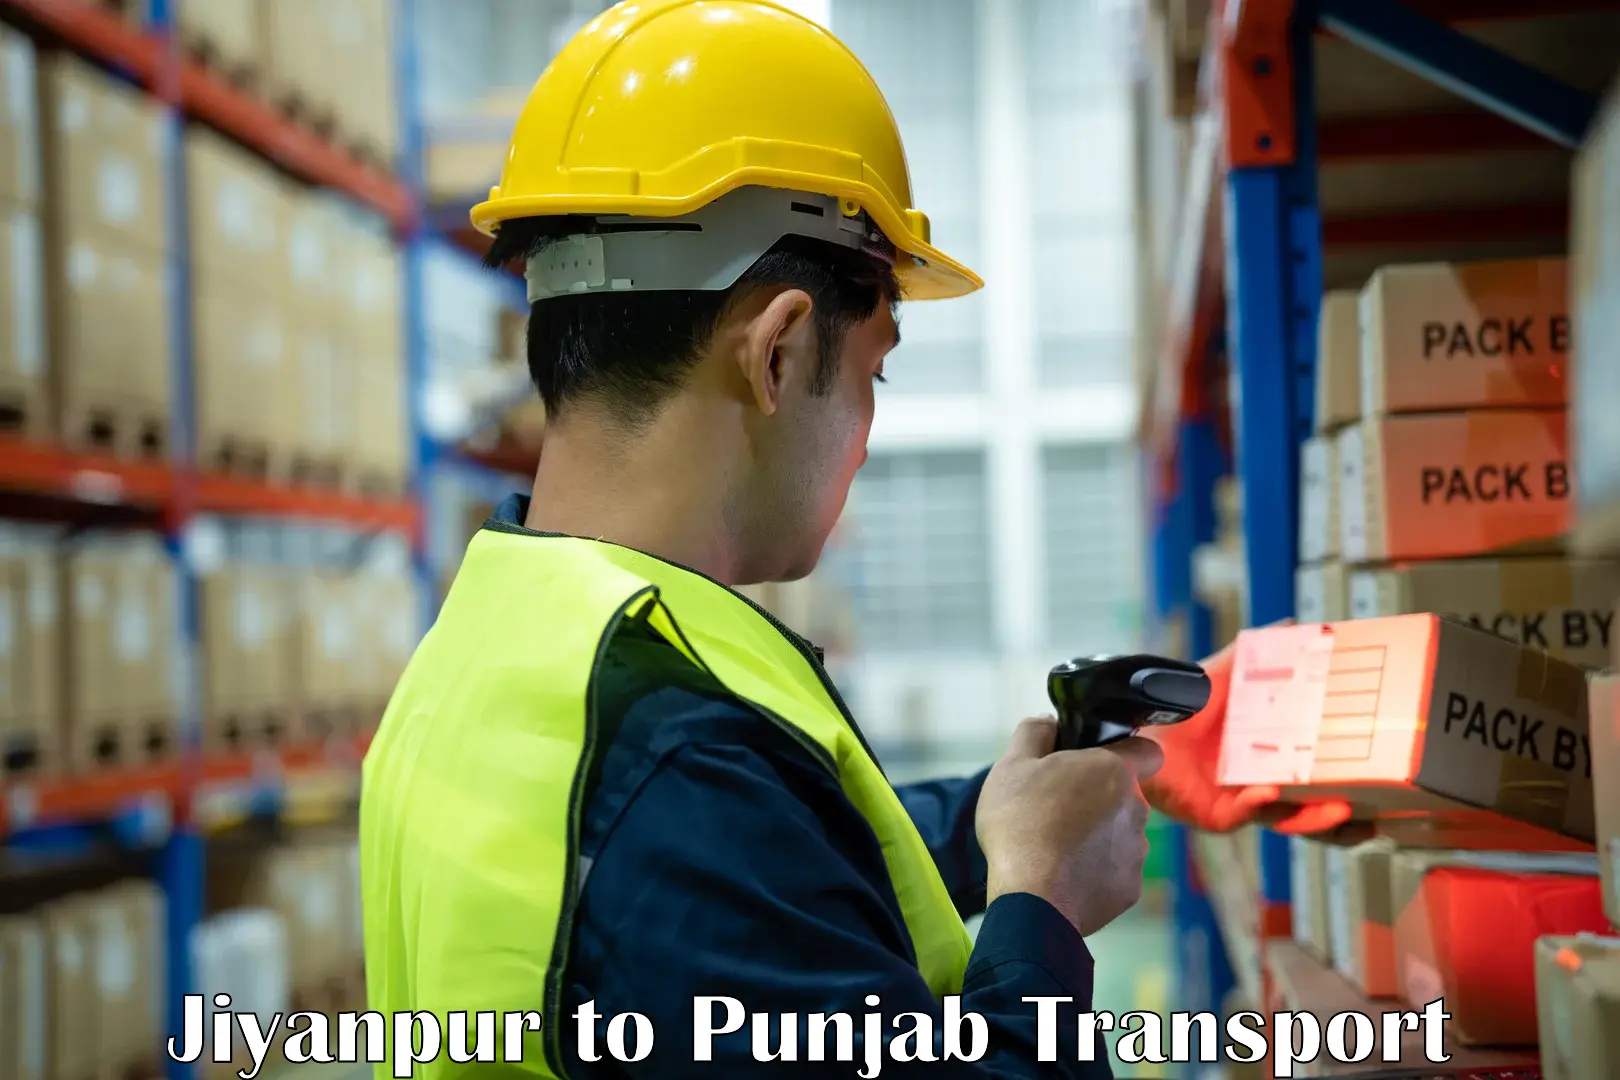 Container transport service Jiyanpur to Goindwal Sahib